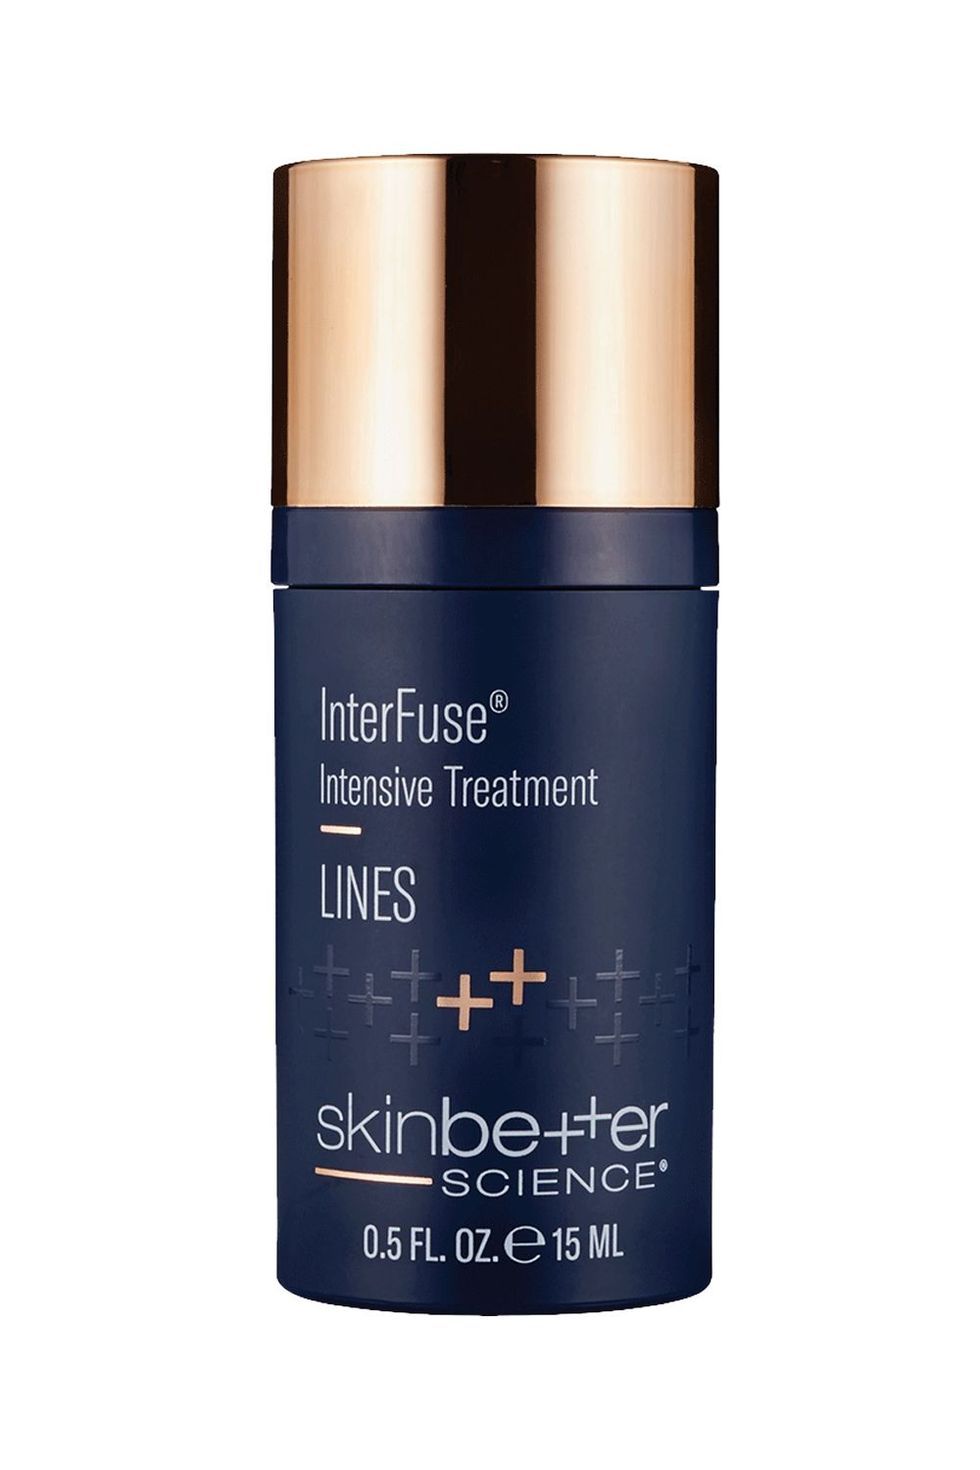 InterFuse Intensive Treatment Lines